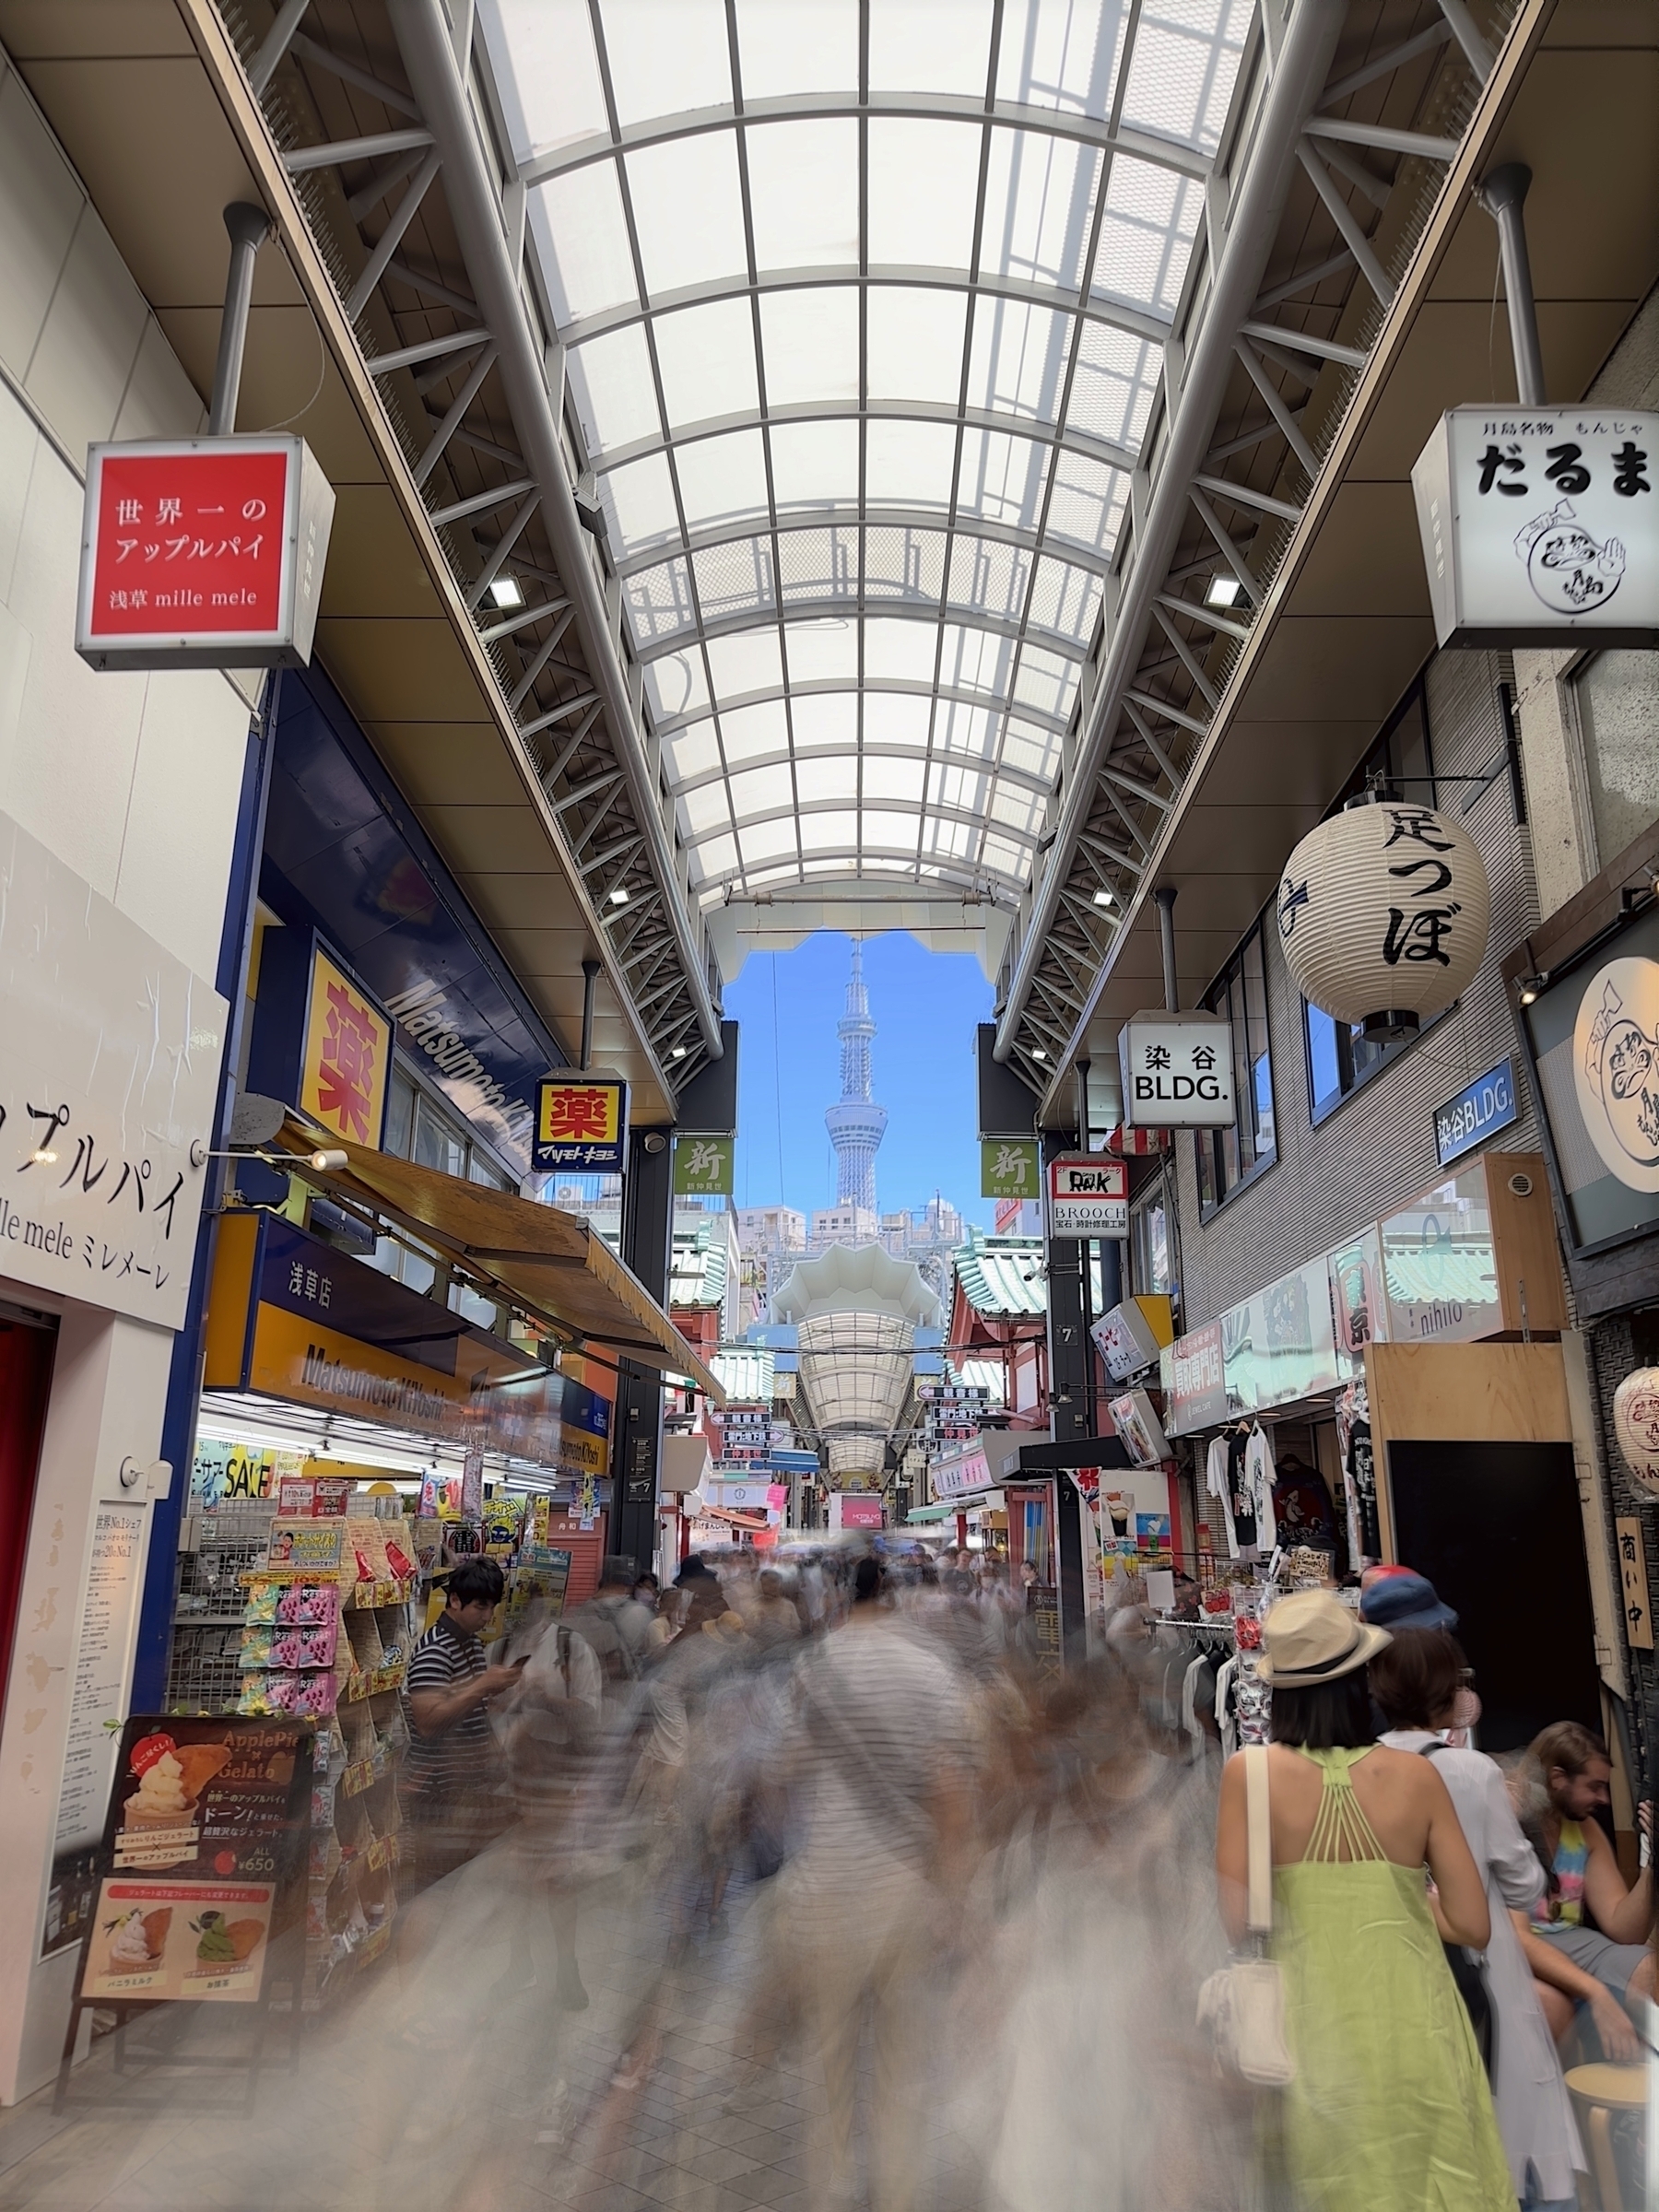 A long exposure of a japanese shopping street. people blur as they move with tokyo skytree in the distance